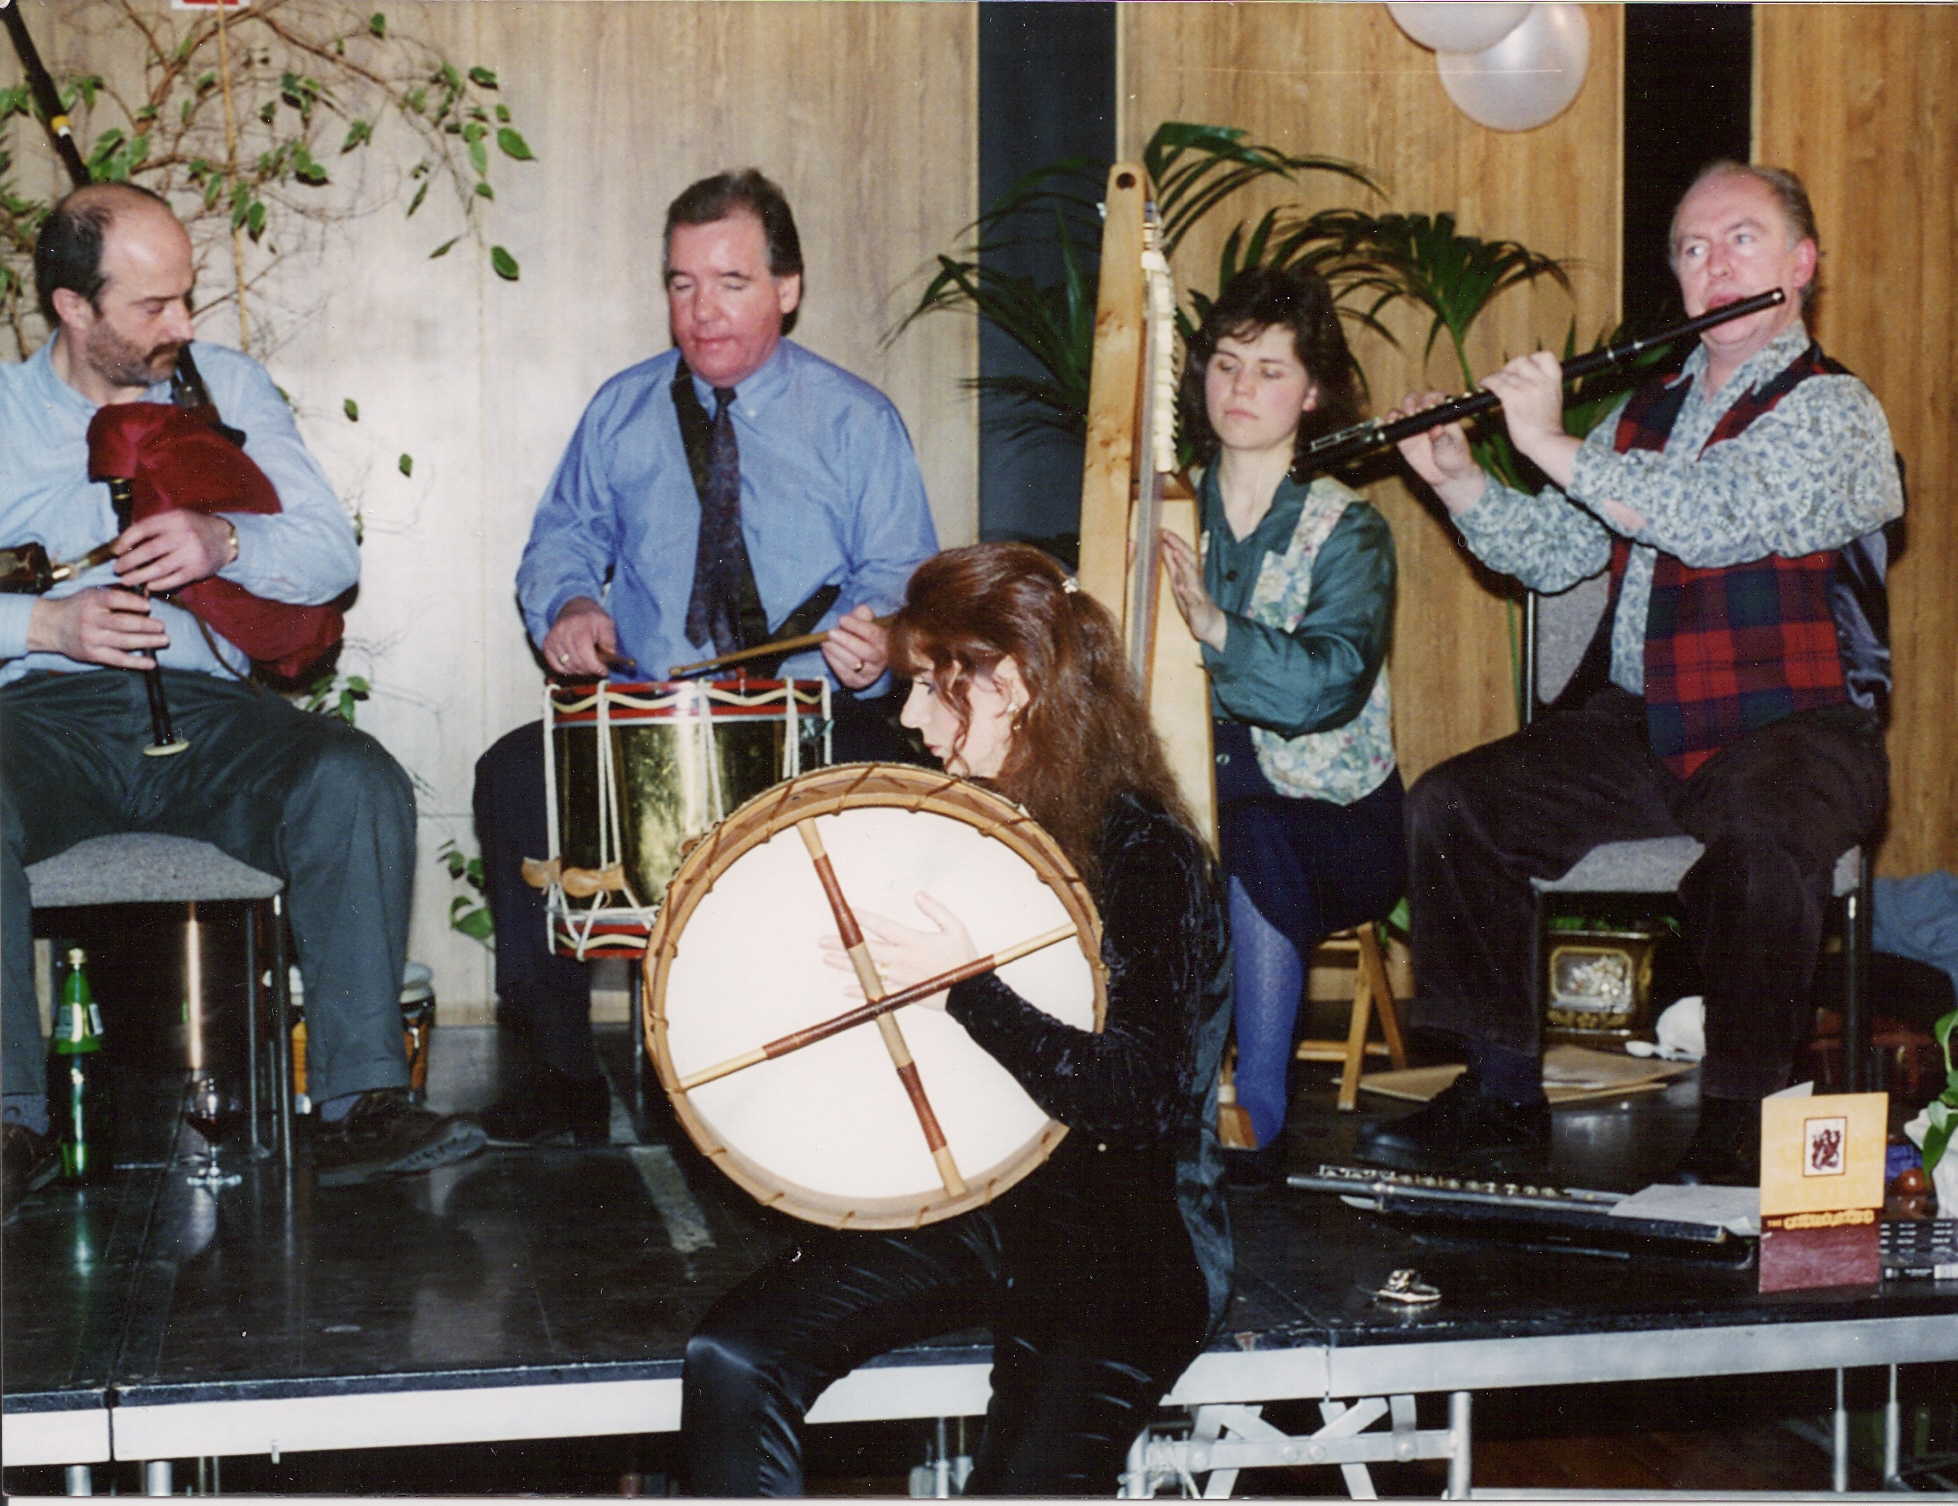 Whistlebinkies play for BBCSSO 60th in 1995 with Evelyn Glennie joining us on bodhran.